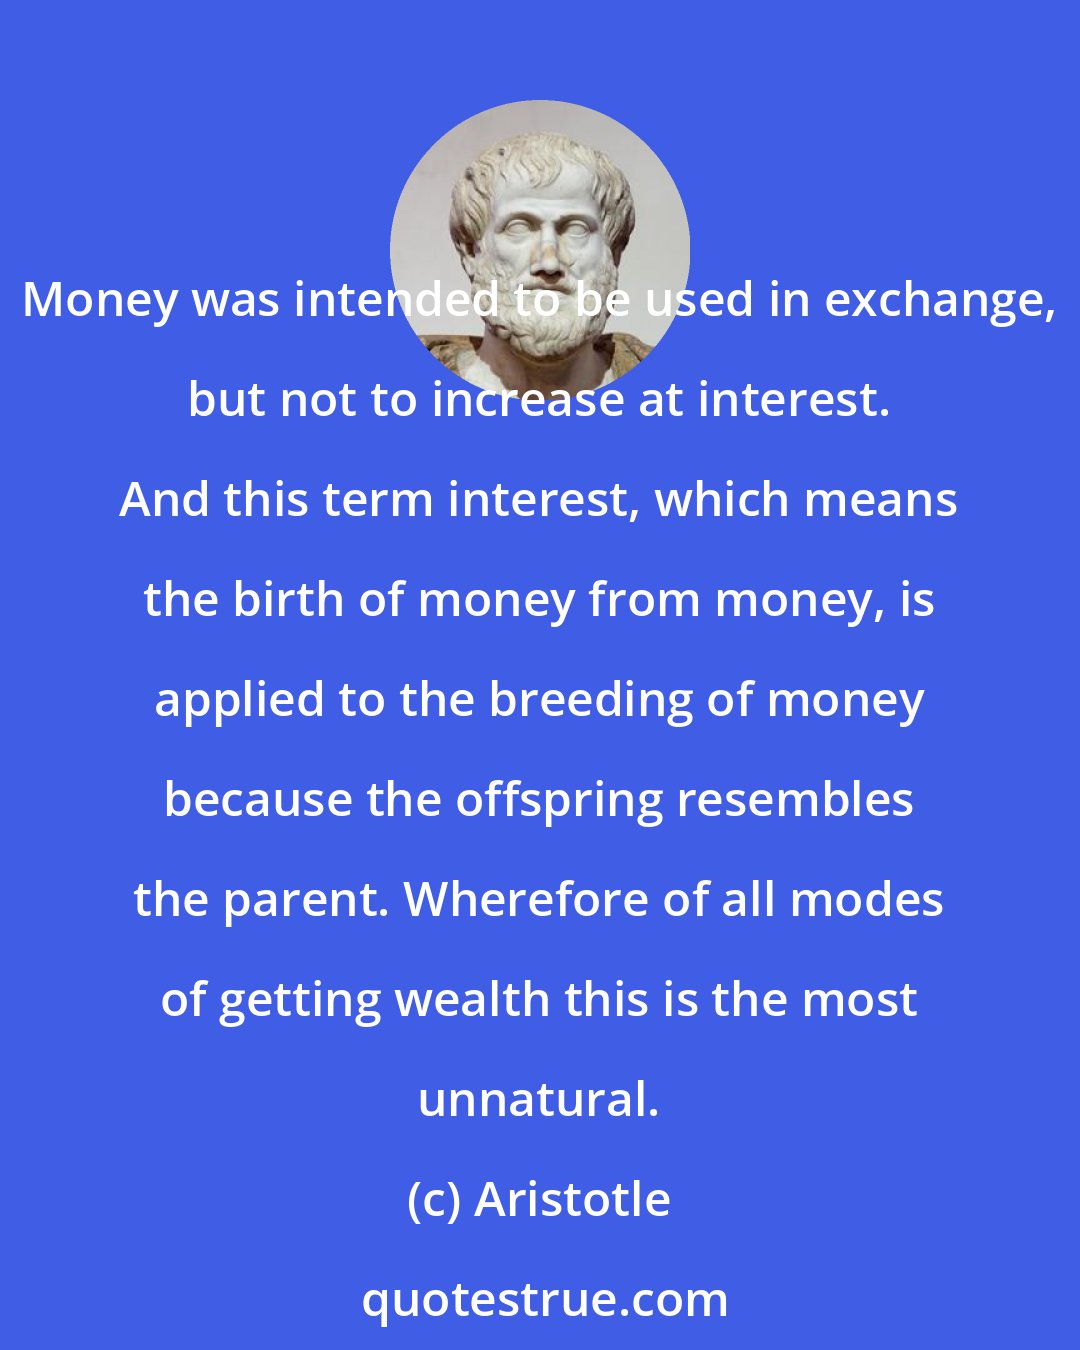 Aristotle: Money was intended to be used in exchange, but not to increase at interest. And this term interest, which means the birth of money from money, is applied to the breeding of money because the offspring resembles the parent. Wherefore of all modes of getting wealth this is the most unnatural.